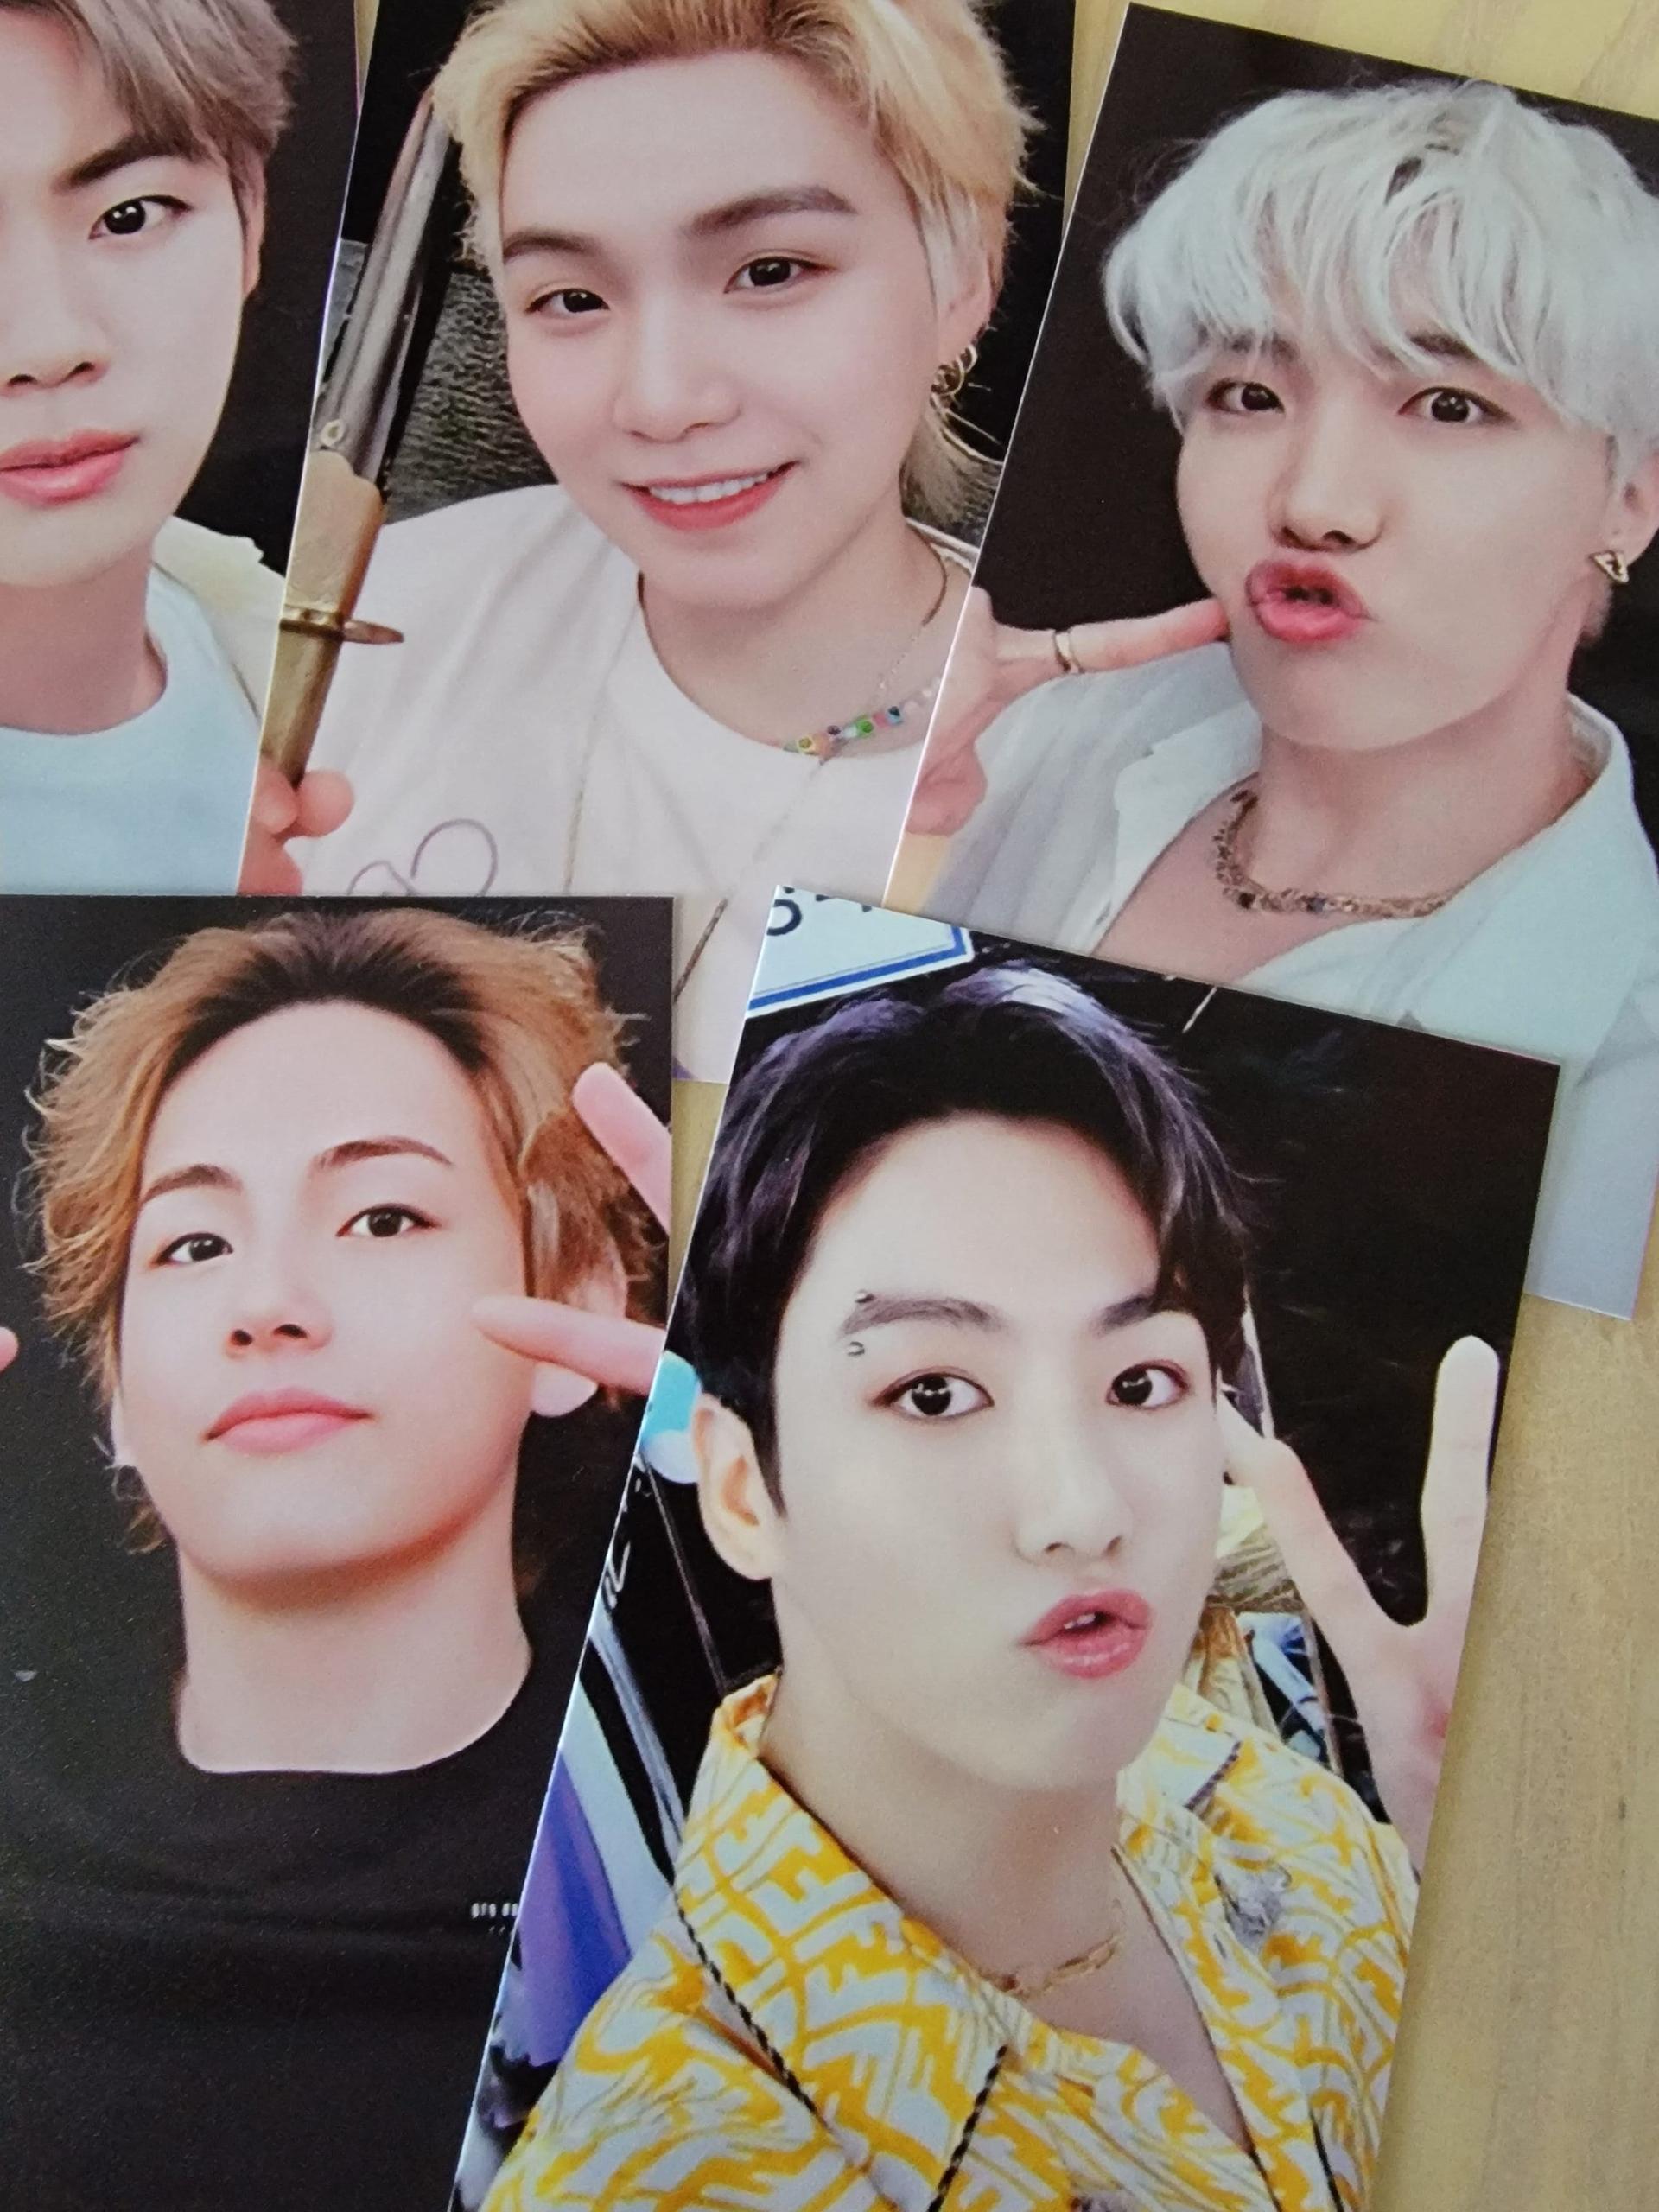 BTS Muster Sowoozoo BR Photocards